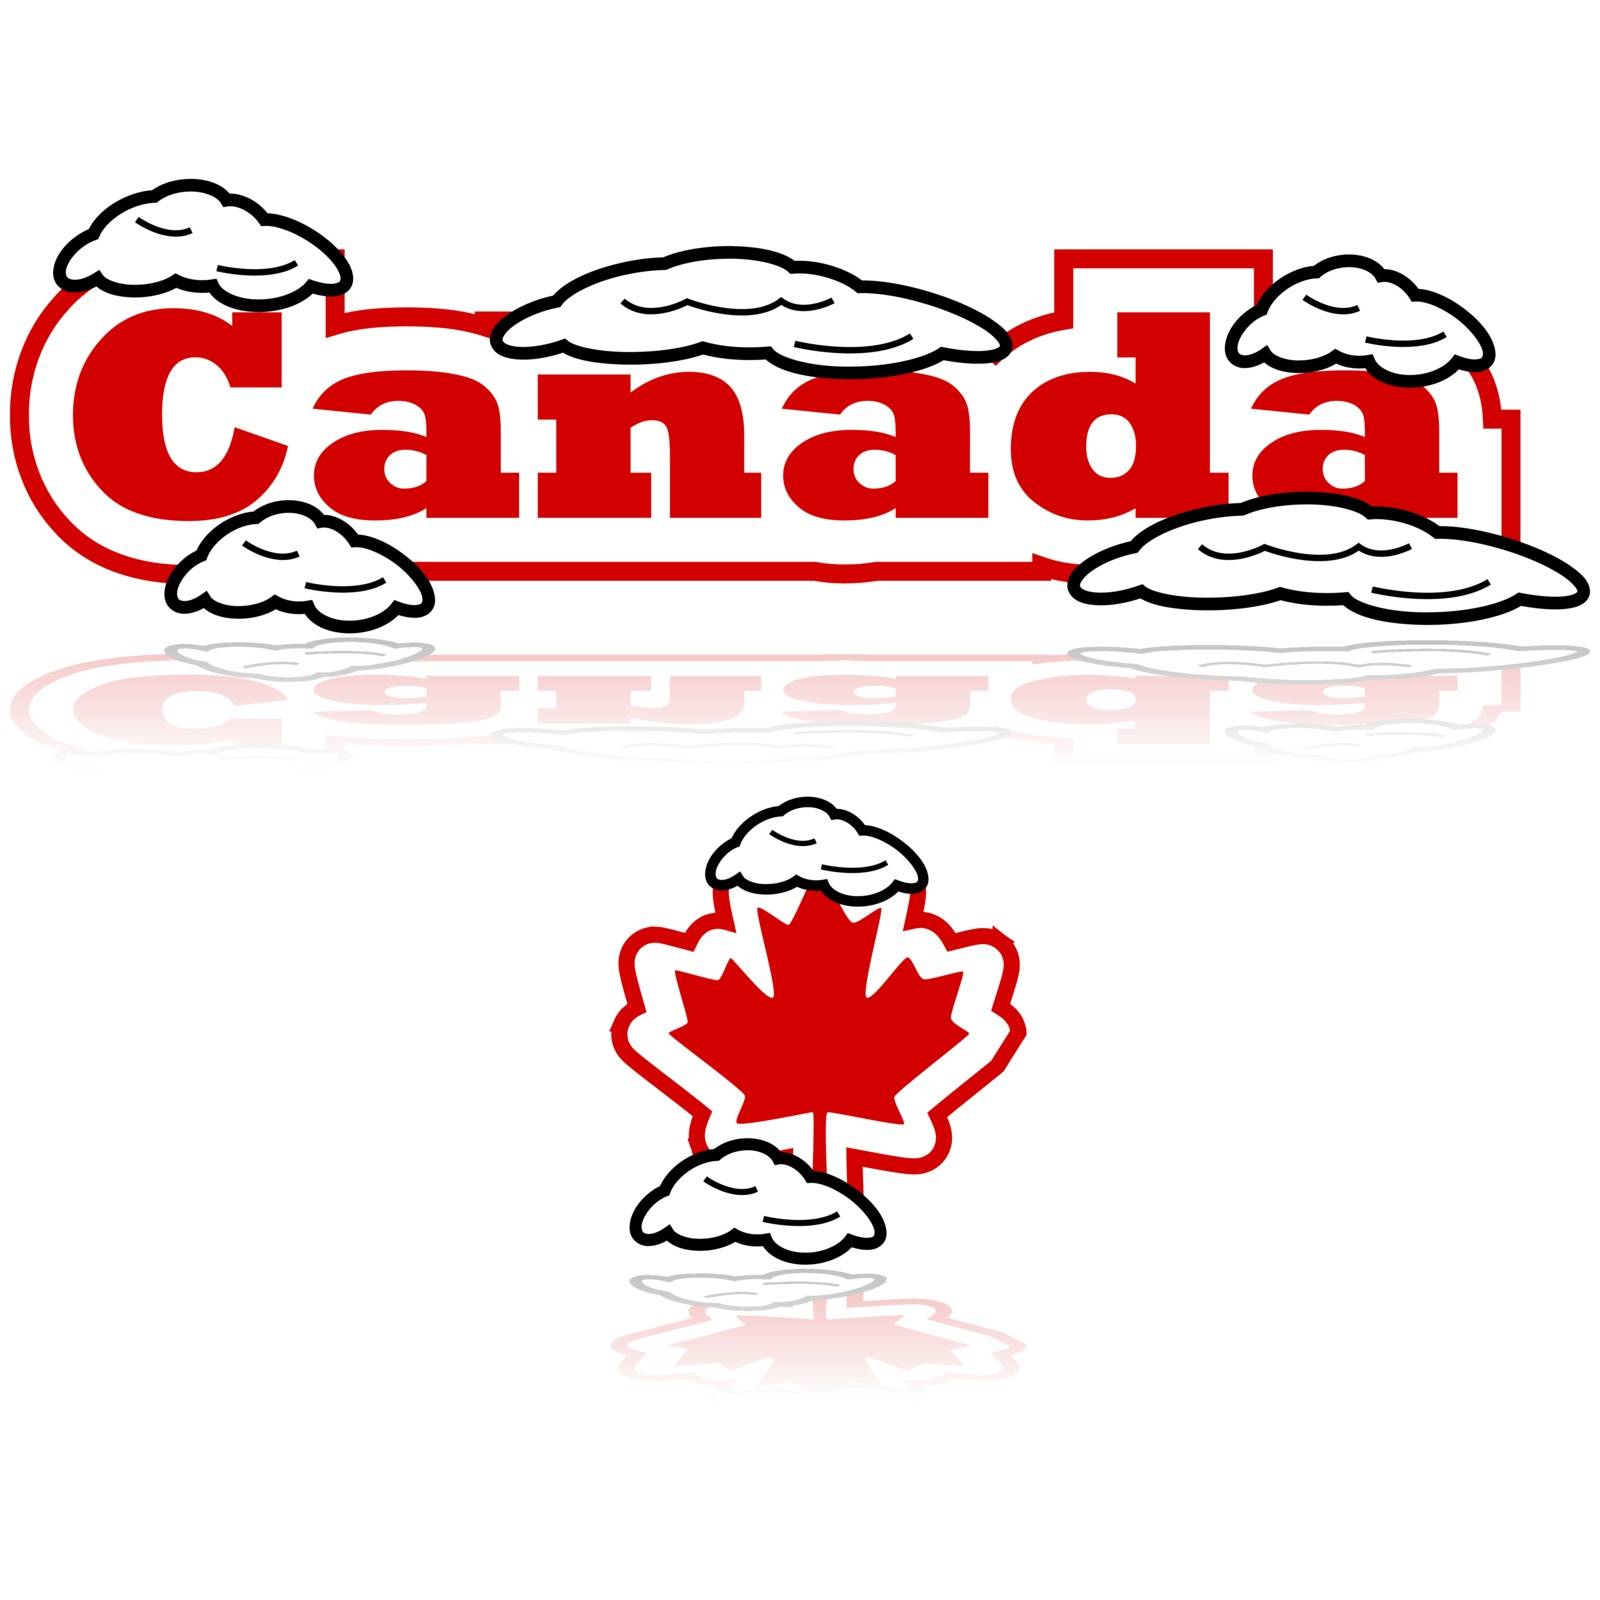 Concept illustration showing the word Canada and a Canadian maple leaf icon partially covered in snow